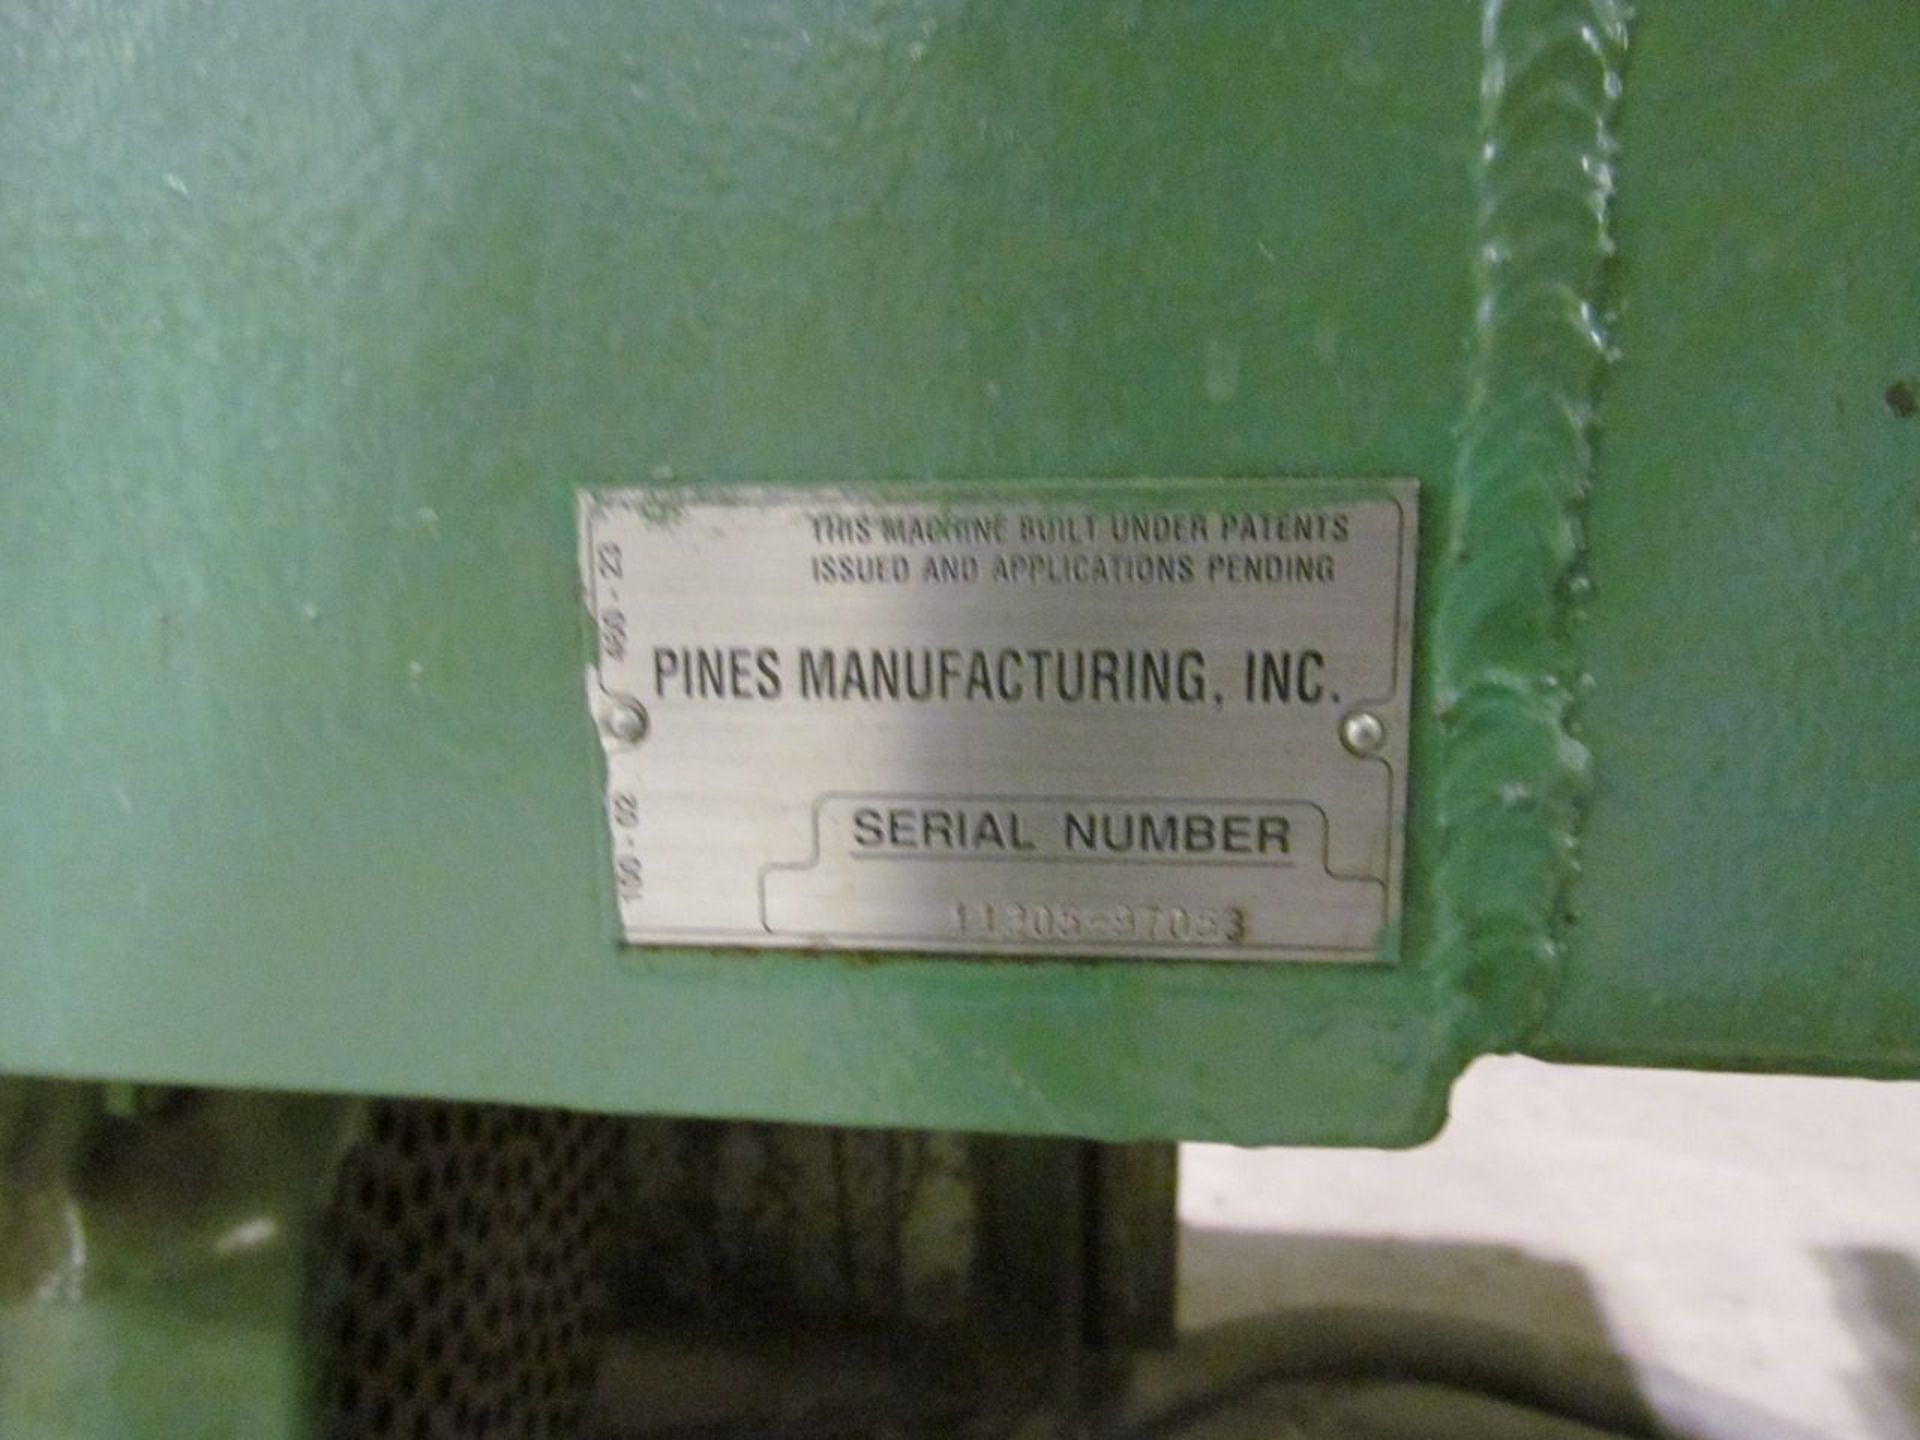 Pines 1-1/4 in. Heavy-Duty Horizontal Semi-Automatic Tube Bender, S/N: 11205-97053 (1997); with - Image 8 of 11